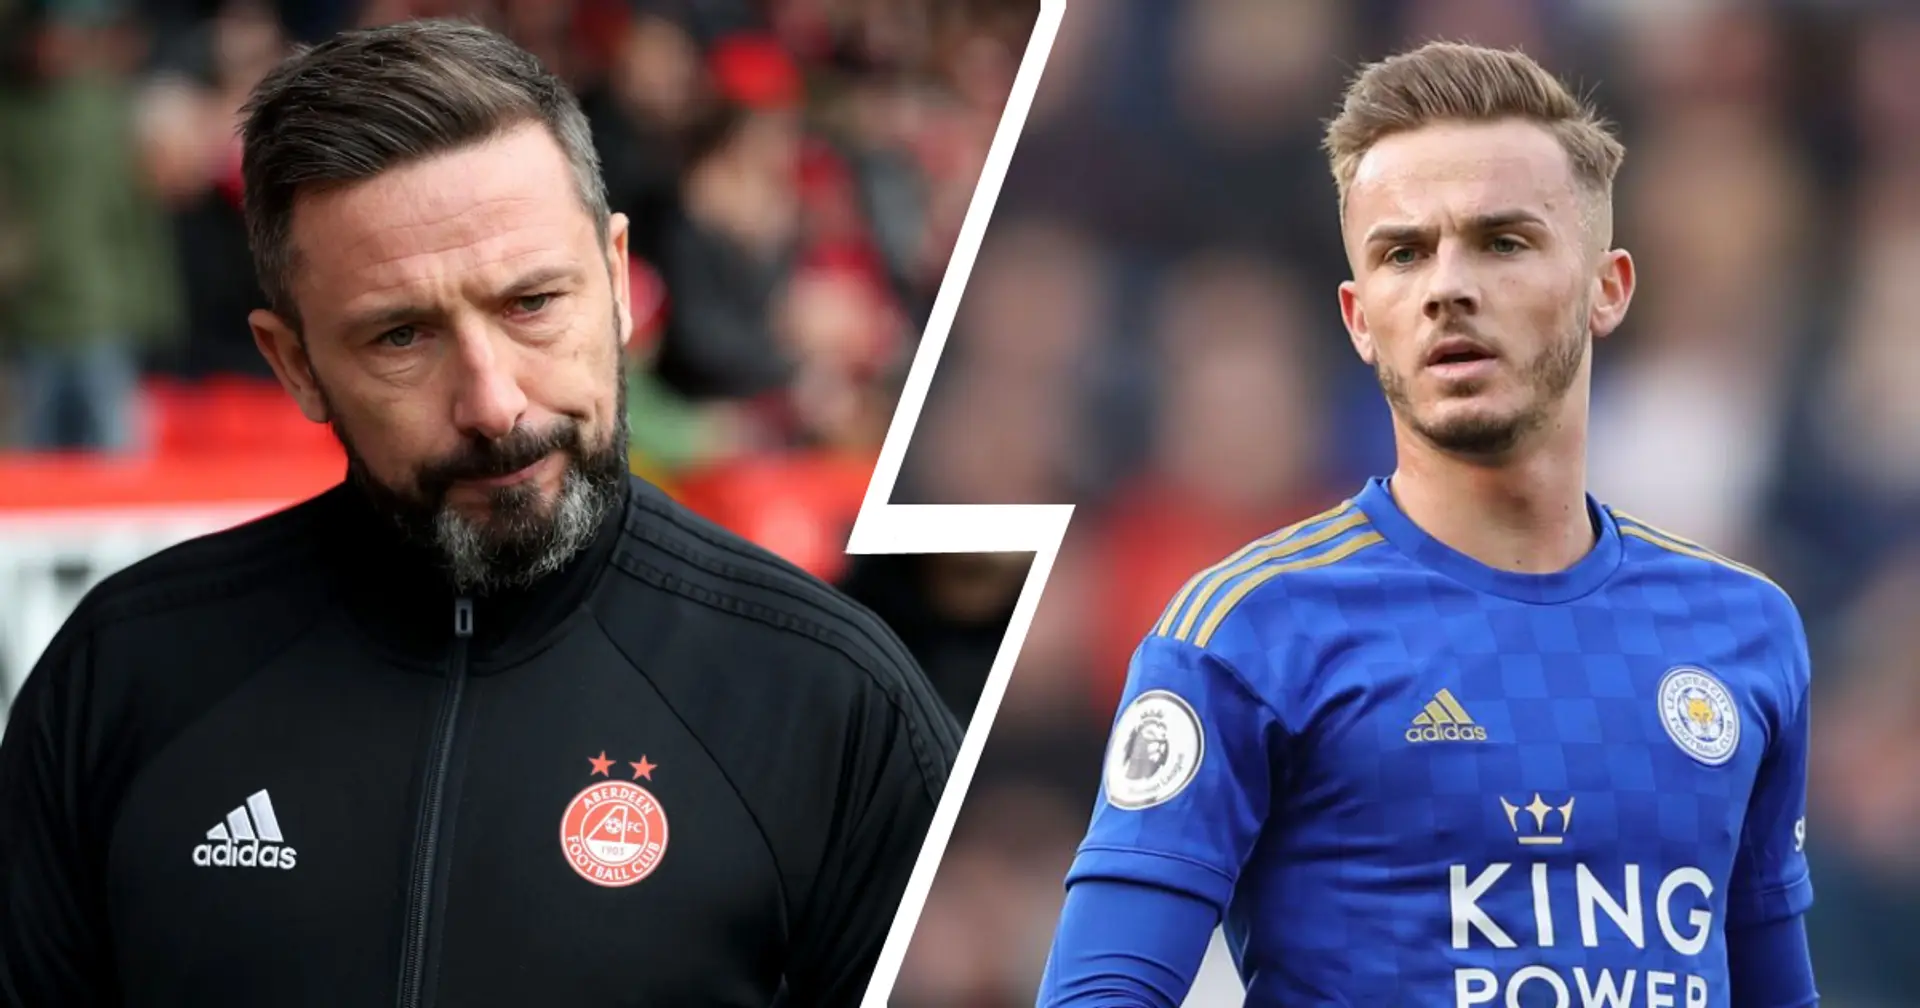 Former manager claims 'best technician' James Maddison is good enough for Man United